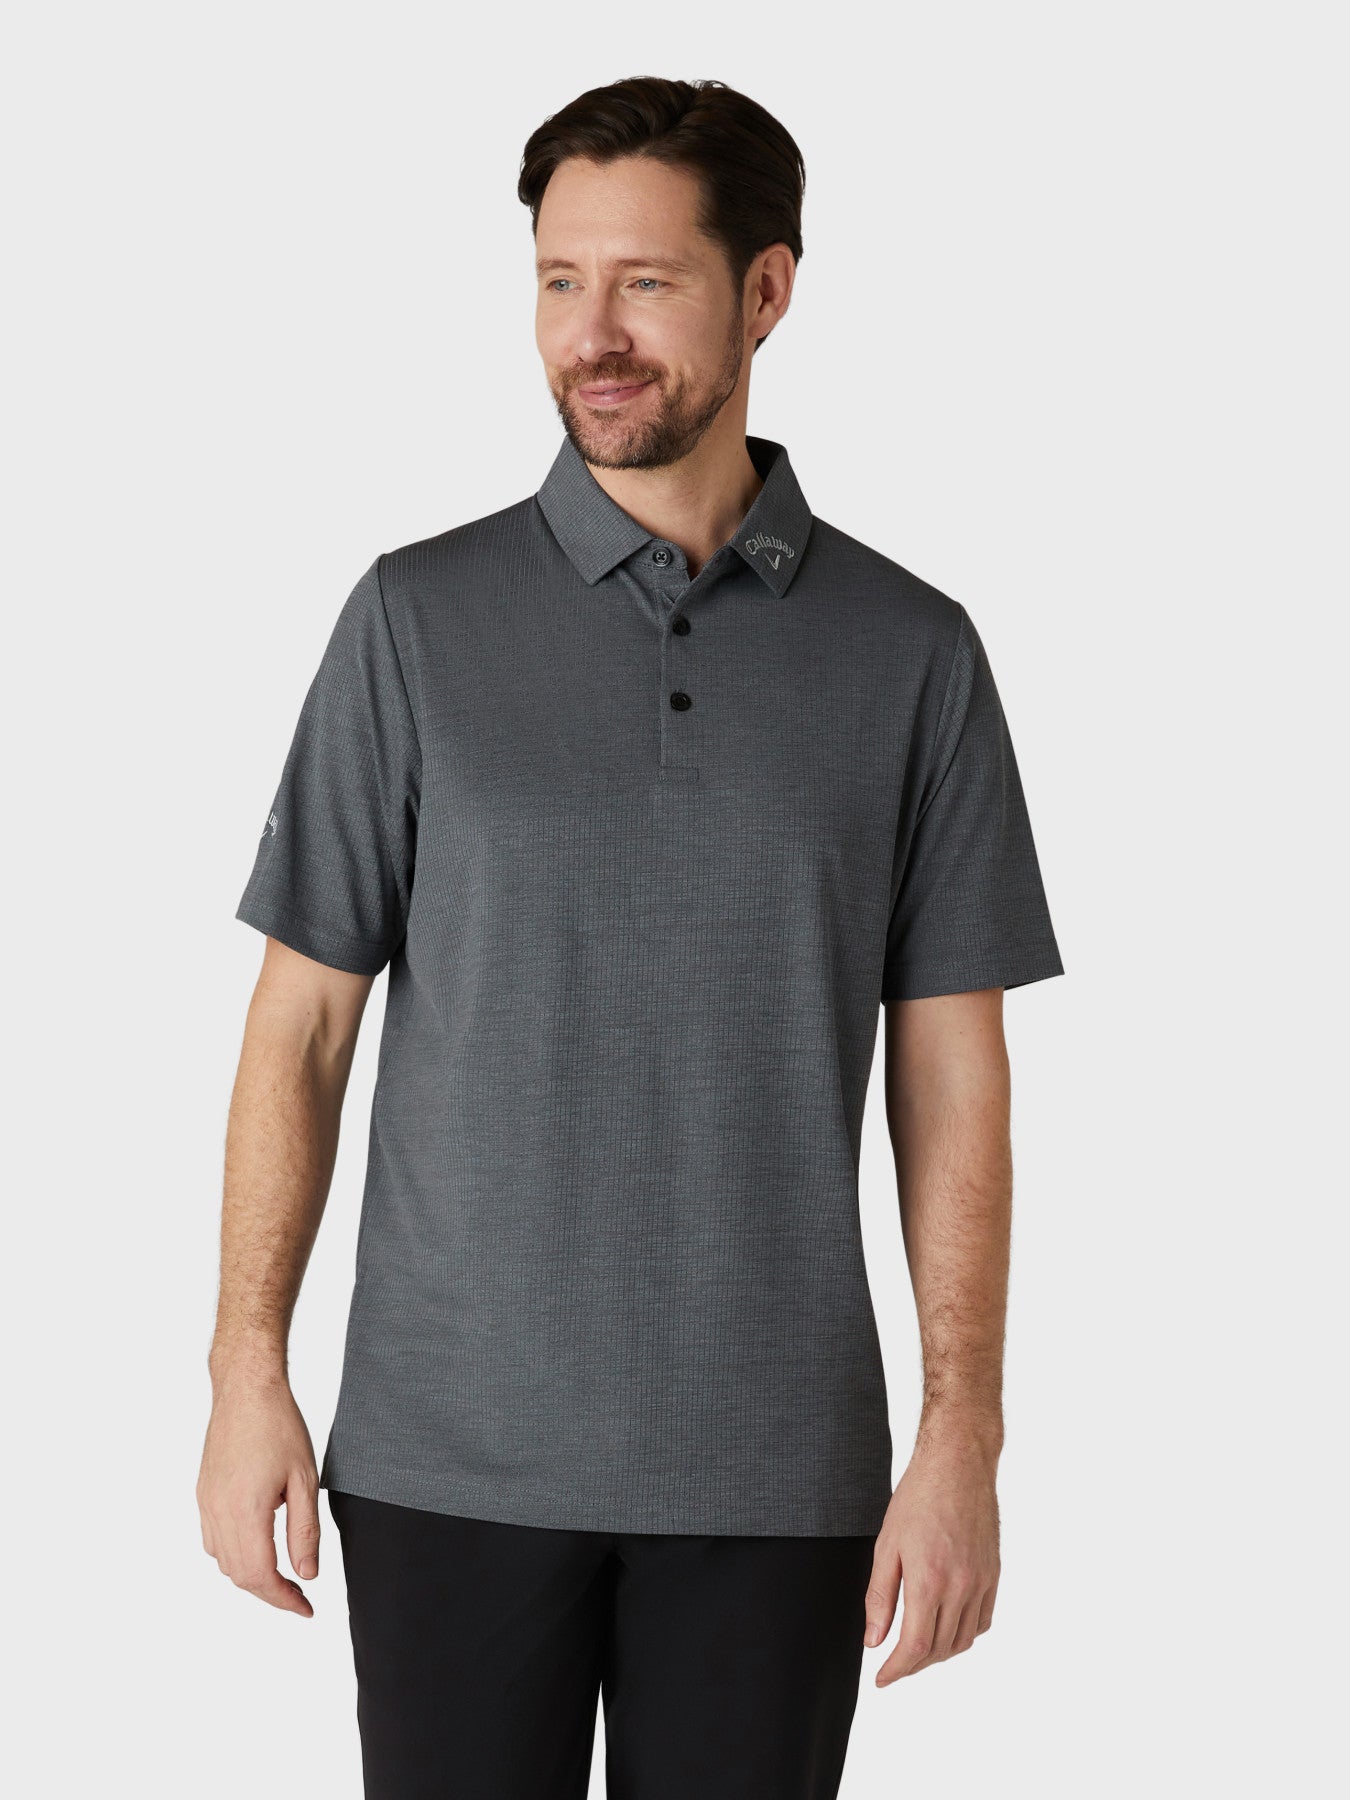 View Ventilated Classic Jacquard Polo In Caviar information